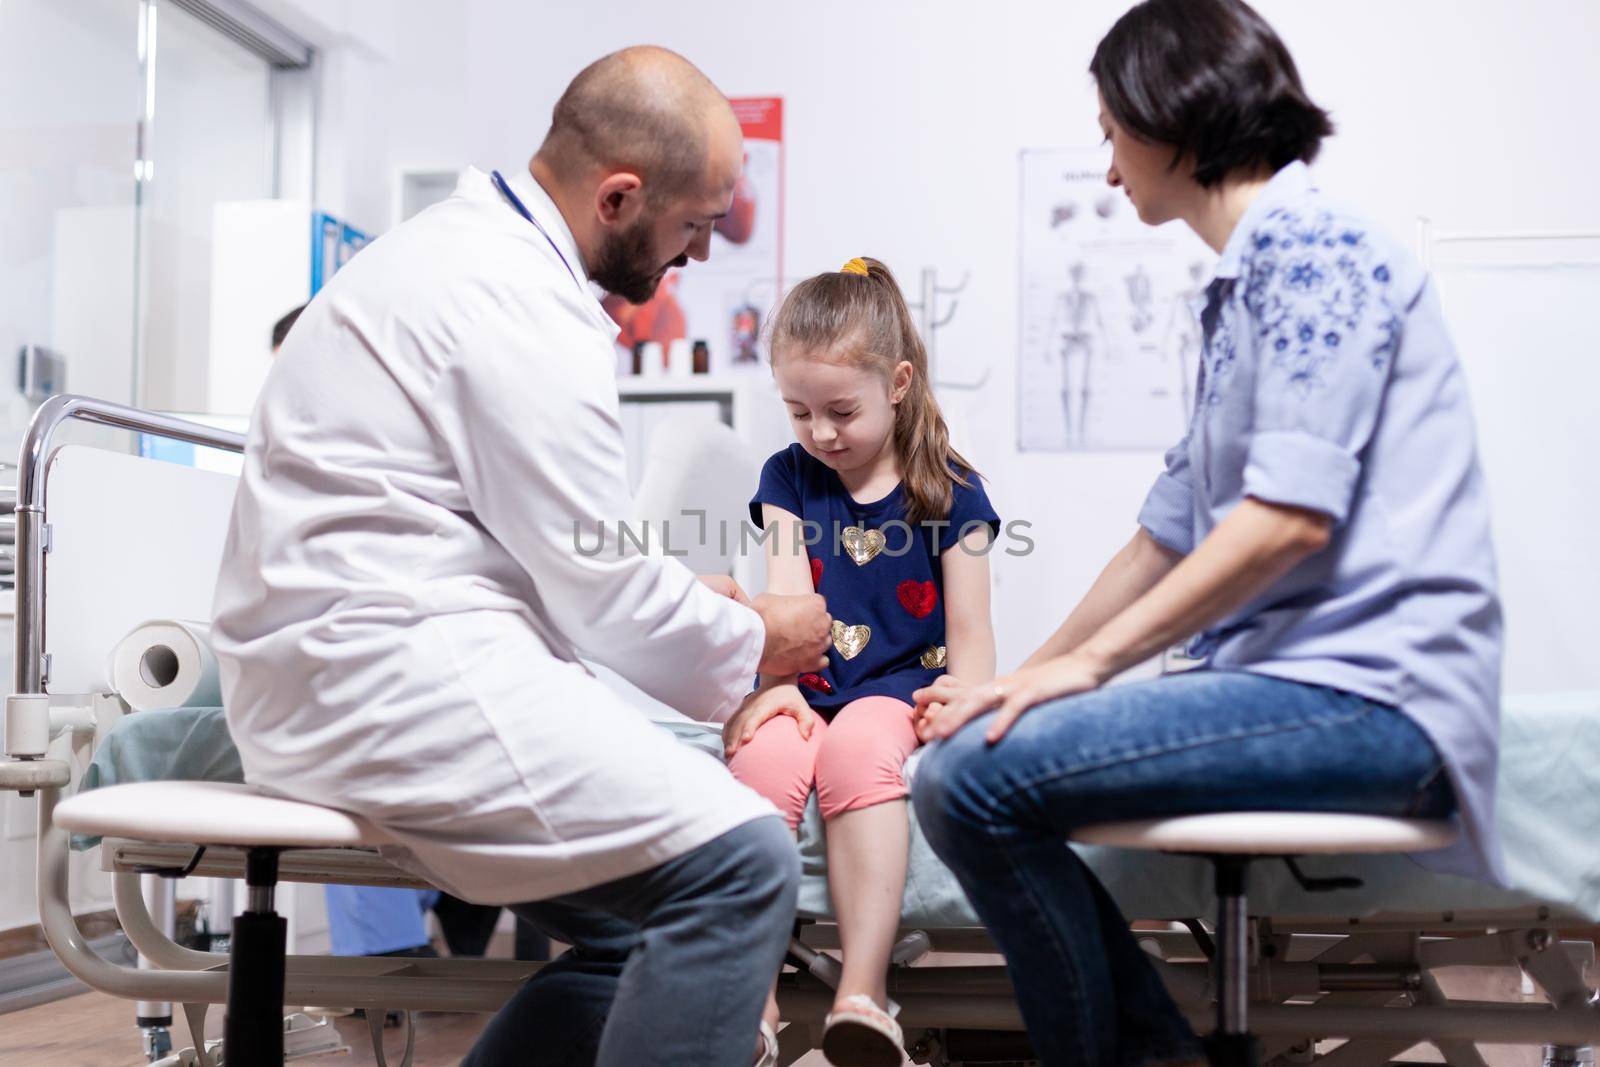 Child having arm pain during medical examination in hospital office. Healthcare physician specialist in medicine providing health care services treatment consultation.